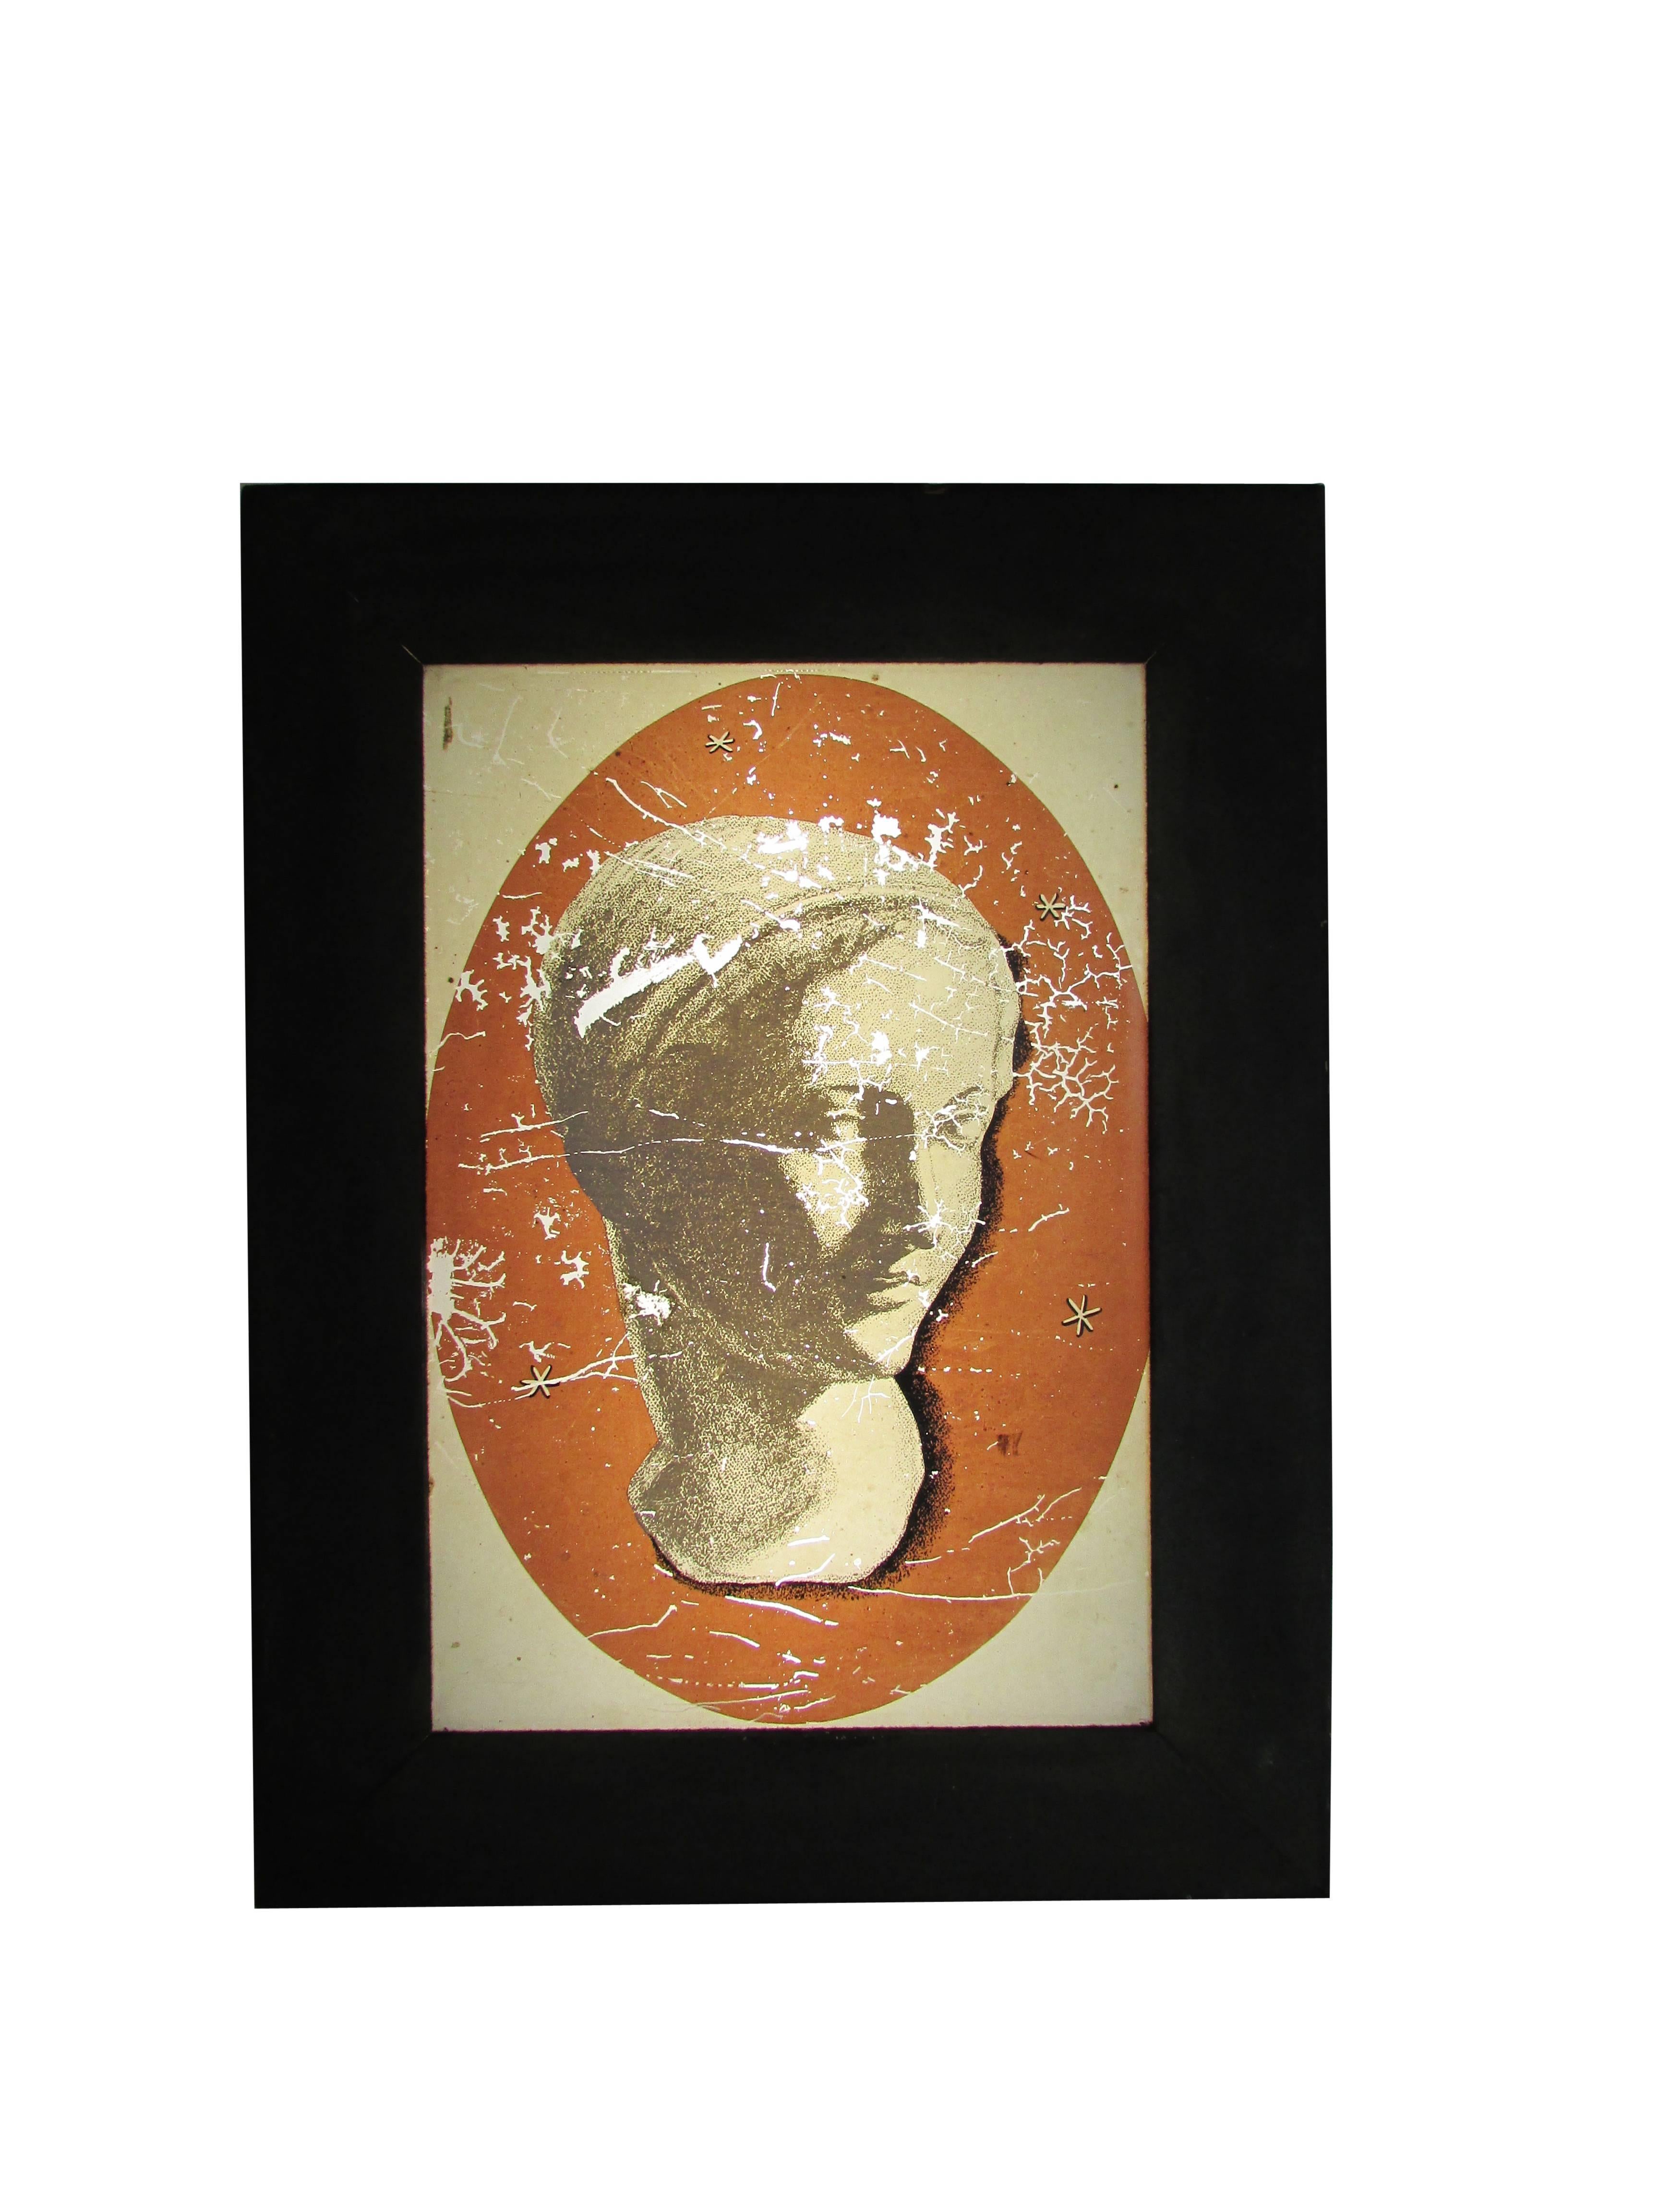 This is a fantastic light box with the image of a female bust painted on glass from a department store.